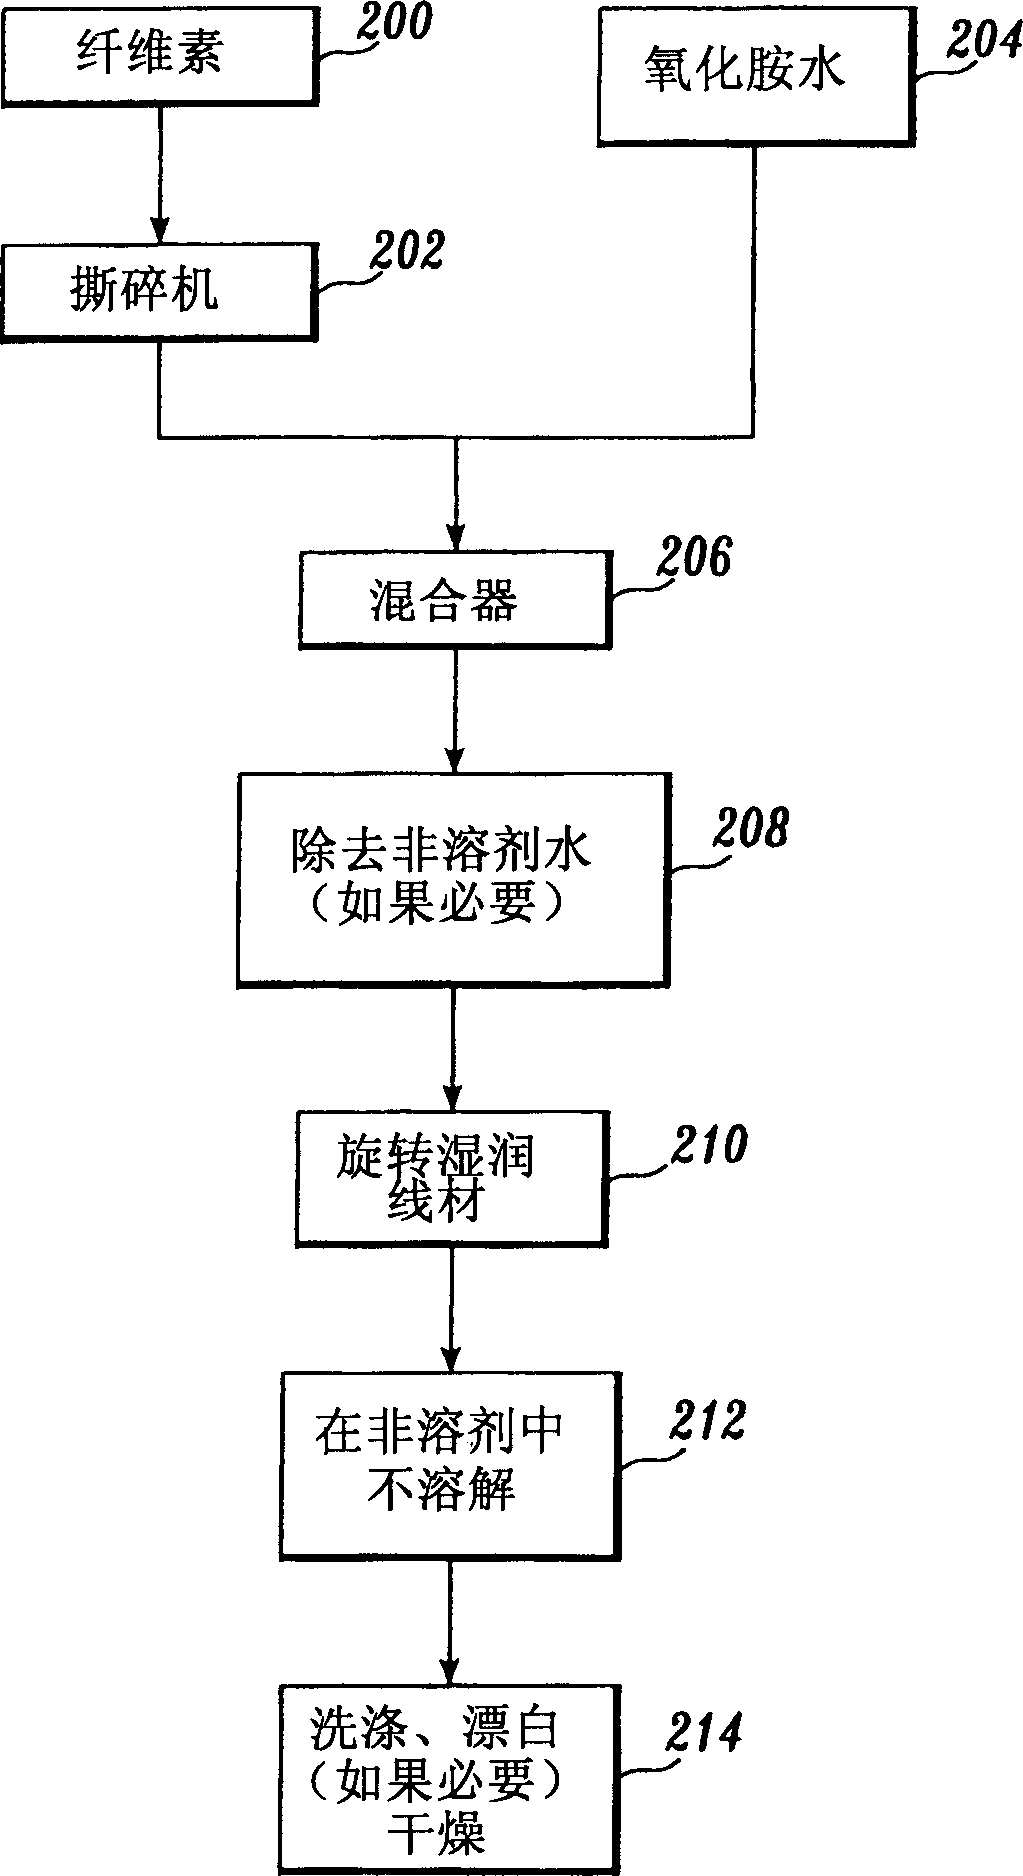 Sawdust alkaline pulp having low average degree of polymerization values and method of producing the same